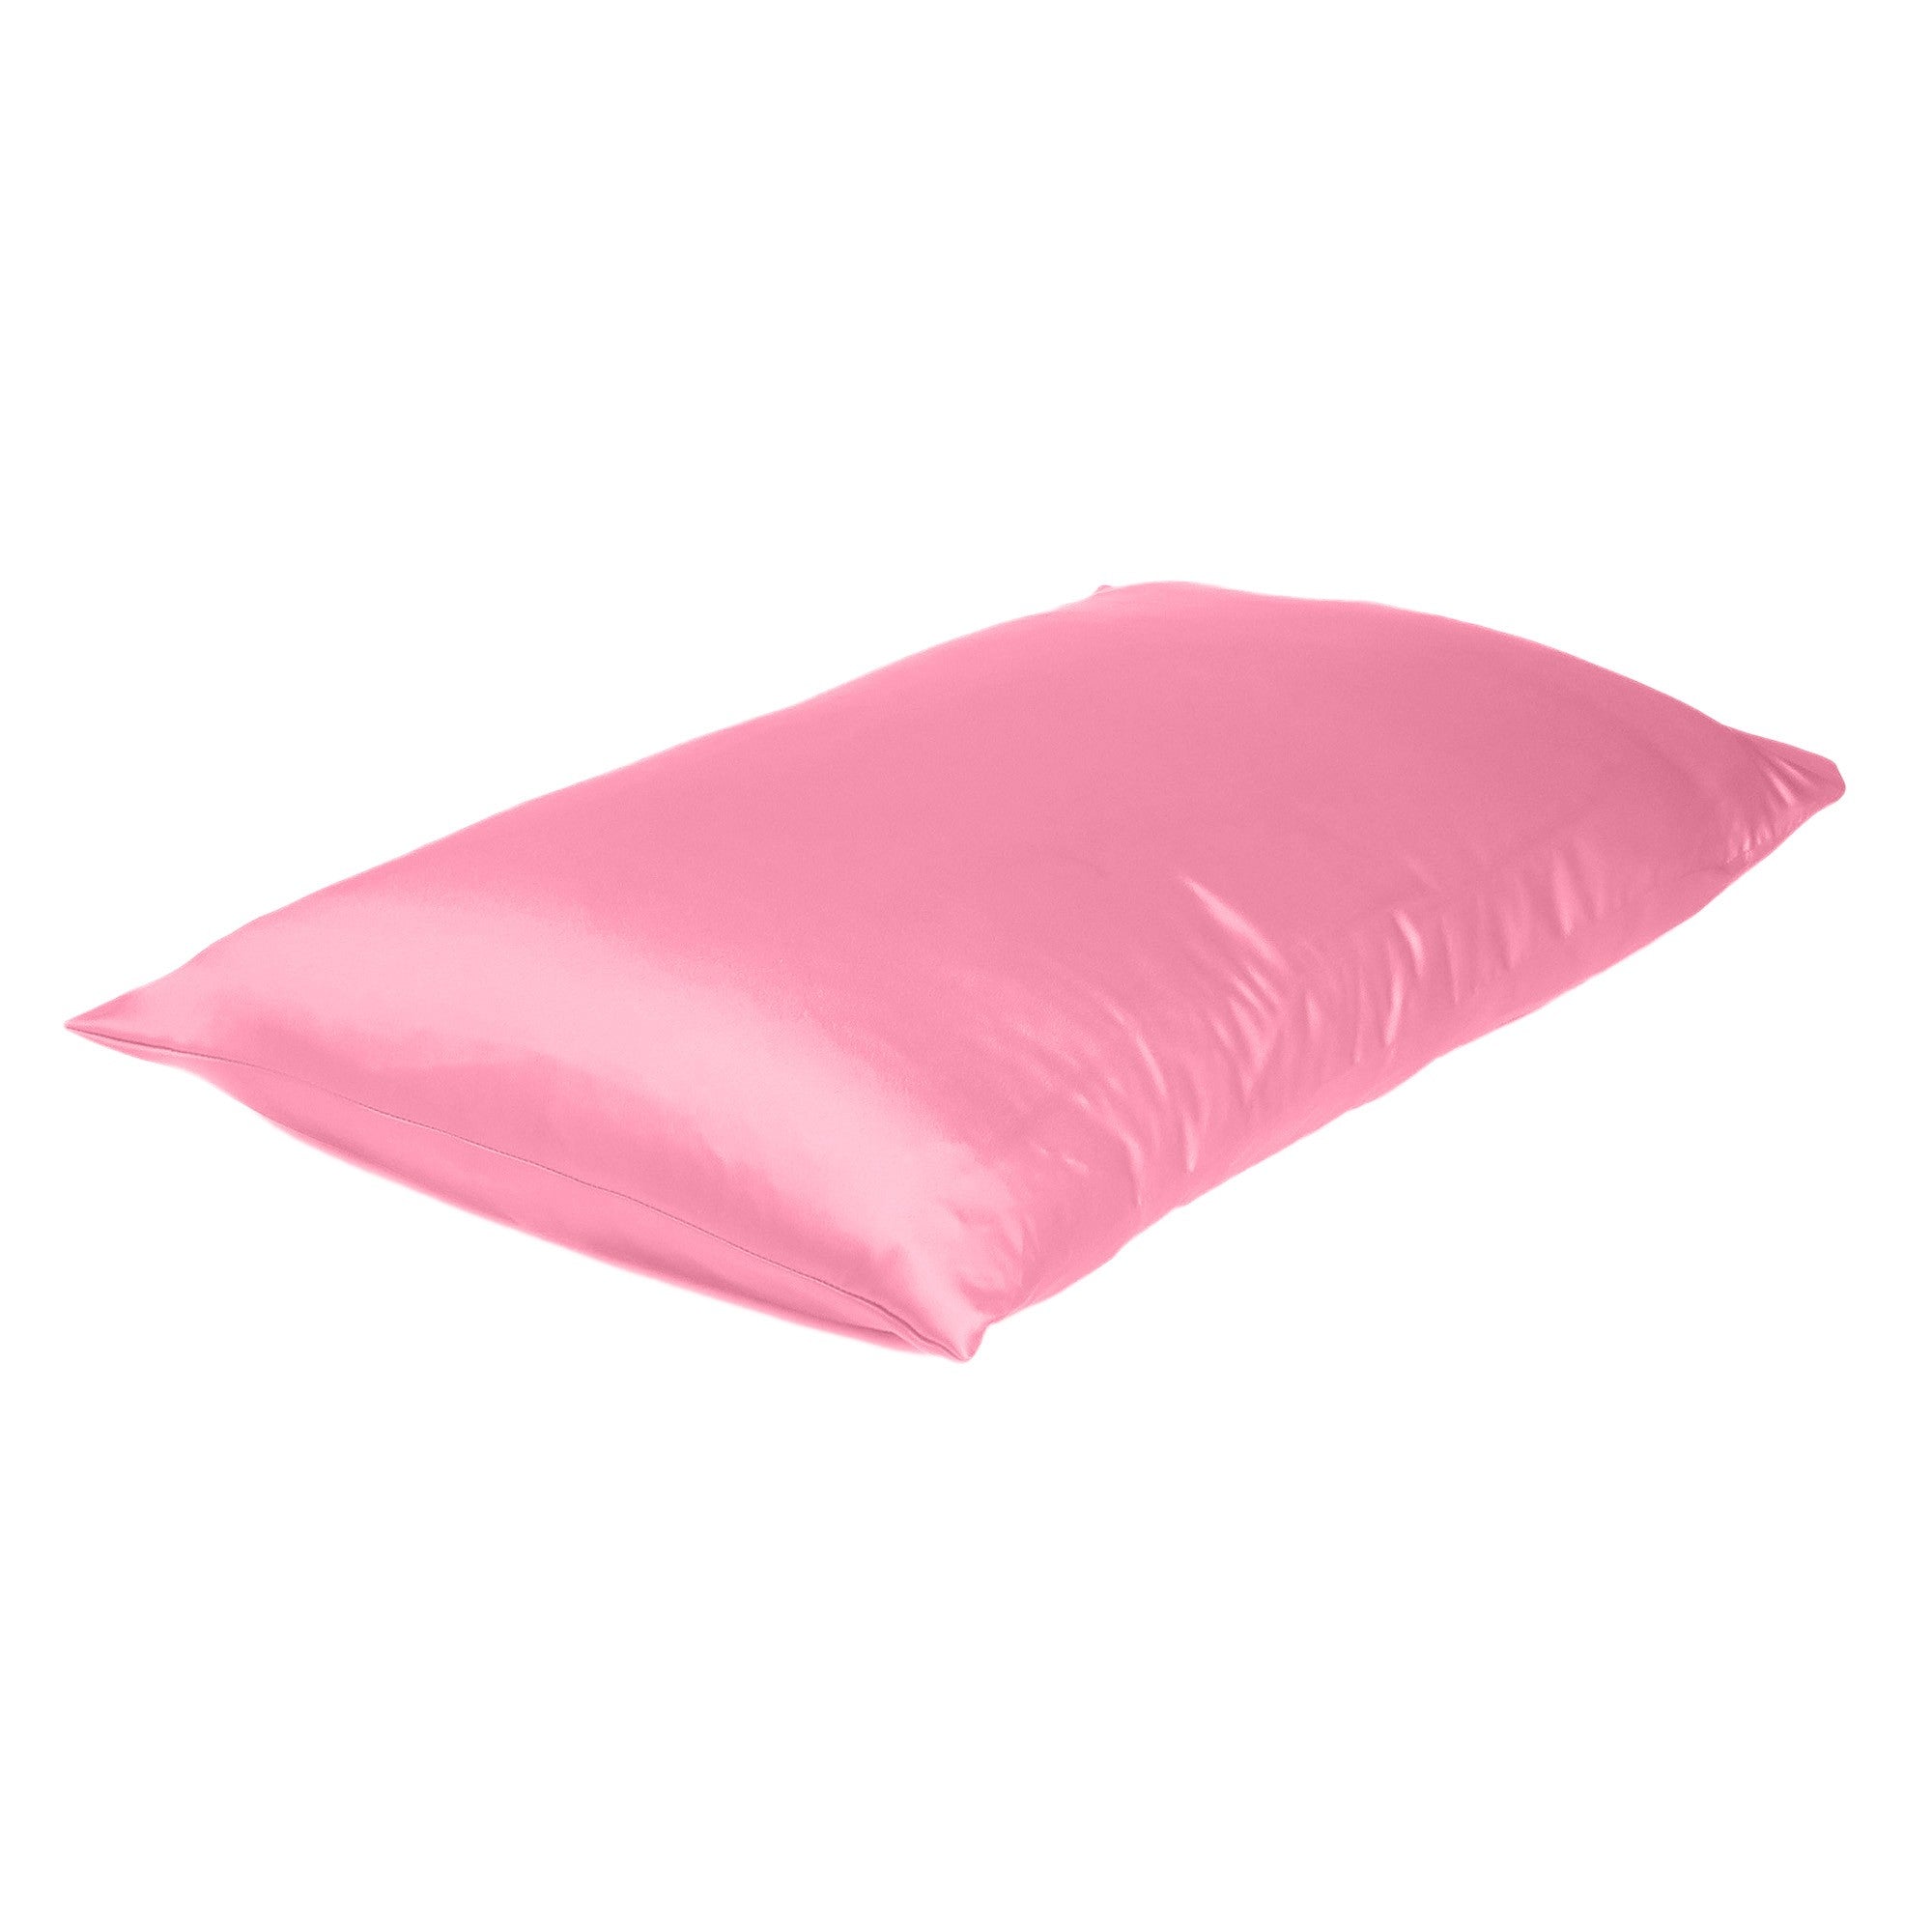 Pink Rose Dreamy Set Of 2 Silky Satin Standard Pillowcases - Tuesday Morning-Bed Sheets